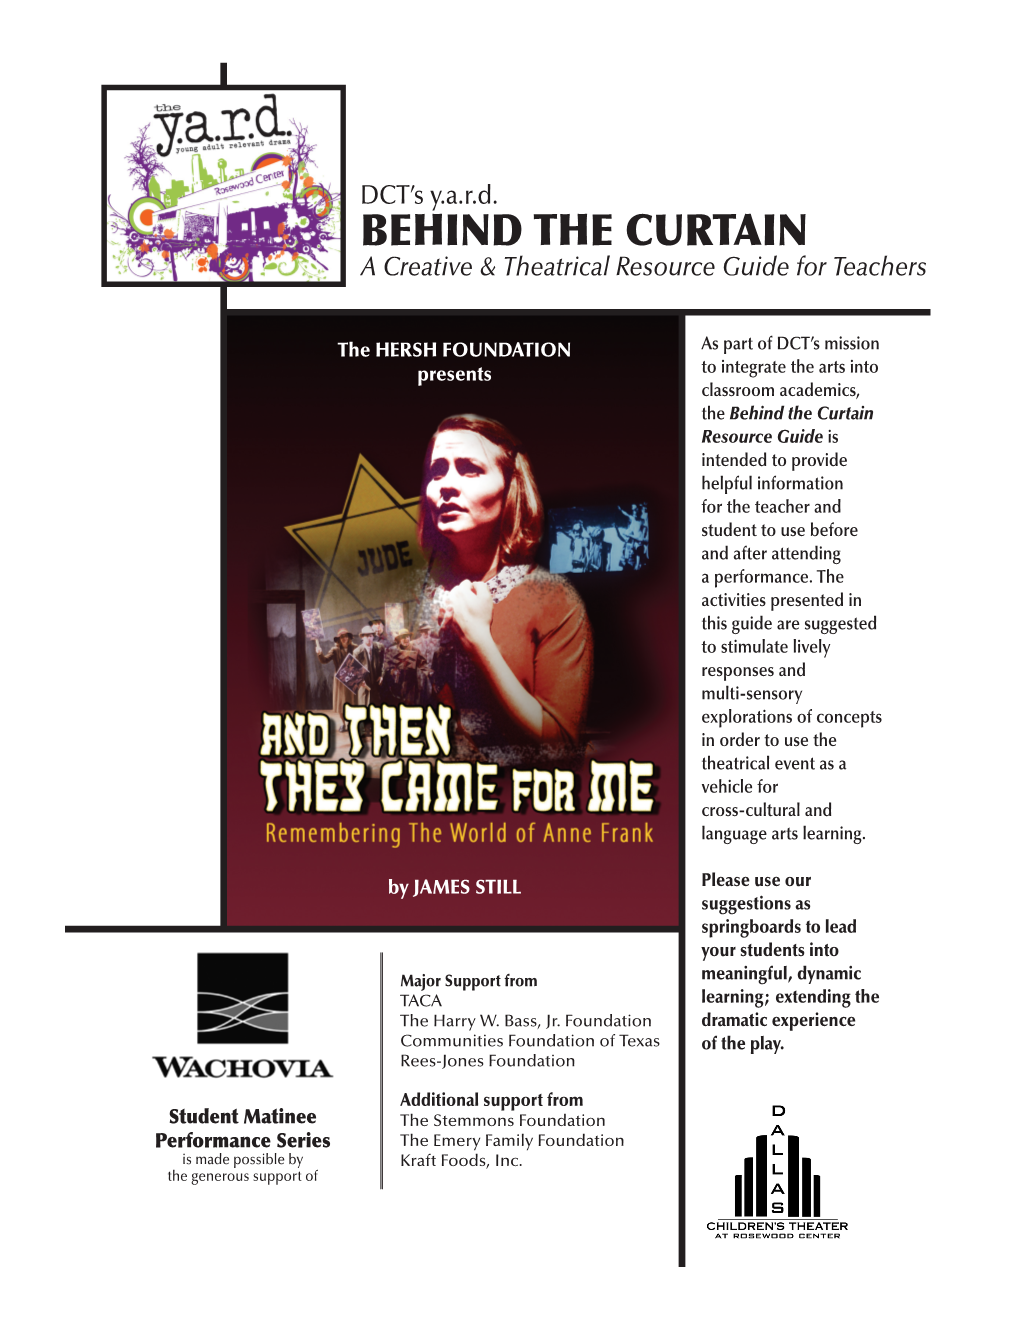 BEHIND the CURTAIN a Creative & Theatrical Resource Guide for Teachers